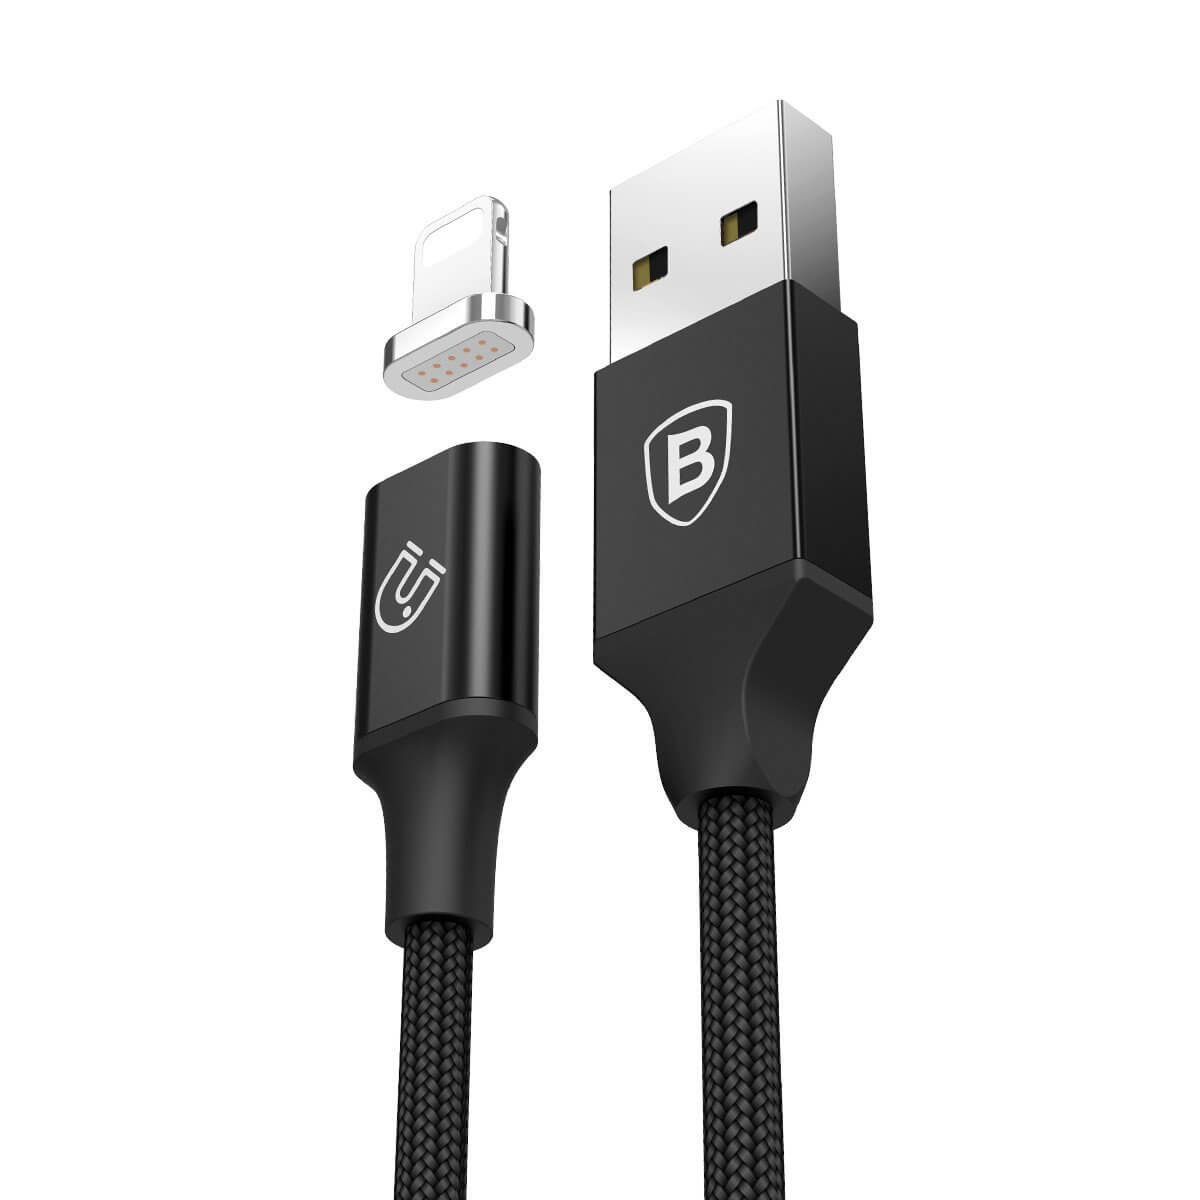 The Magnetic Usb Cable To Seamlessly Charge And Sync Your Iphone Ipad